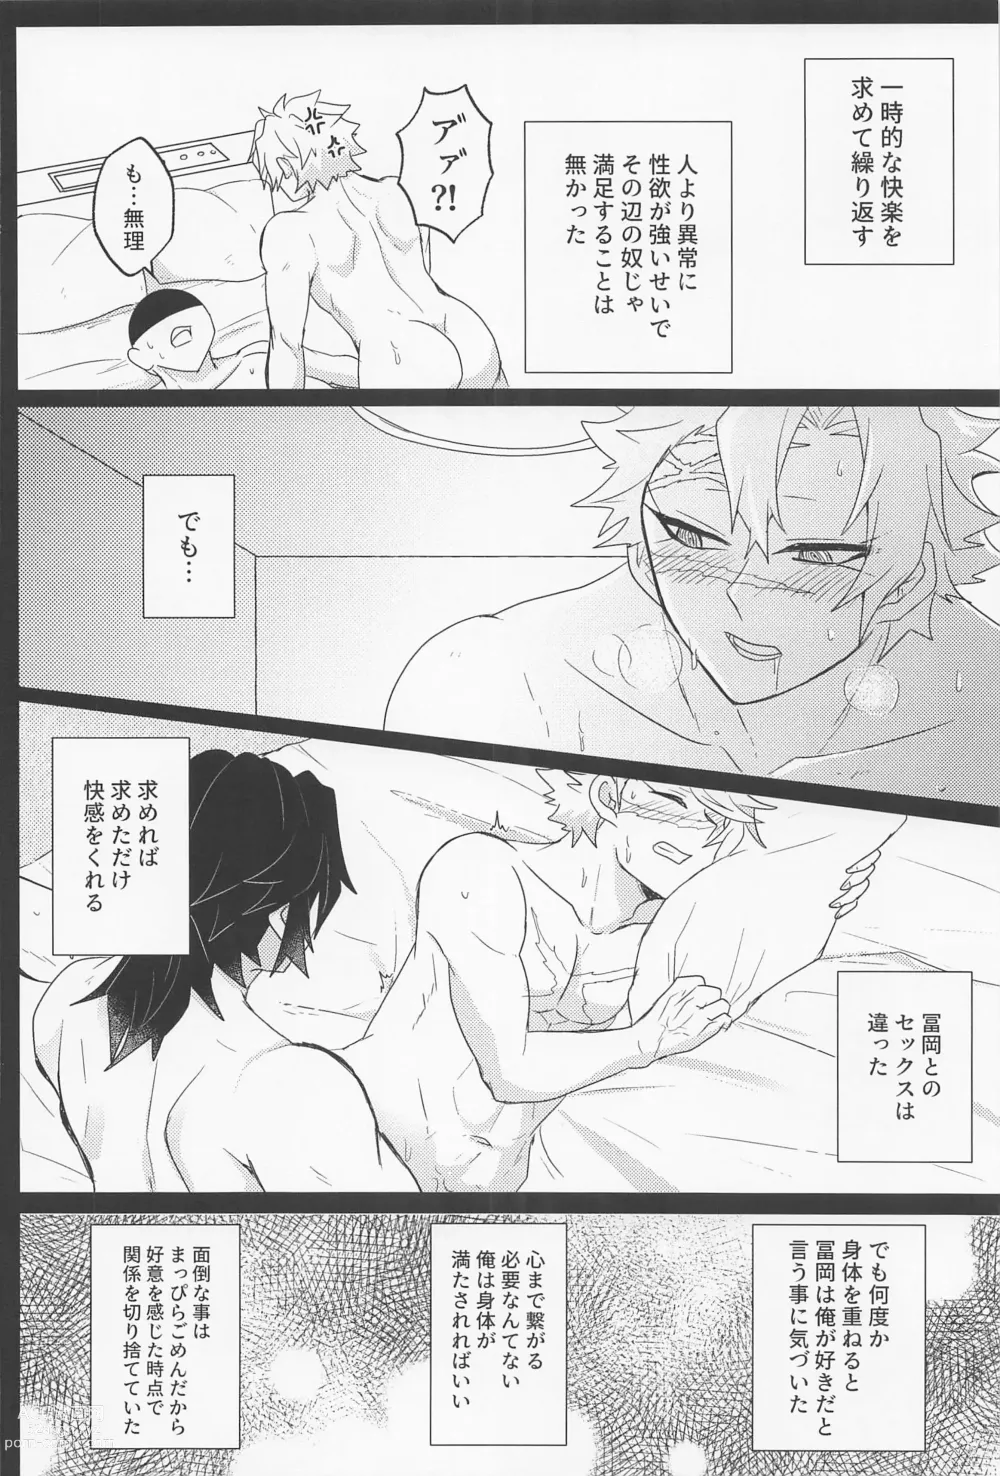 Page 19 of doujinshi Its all up to you